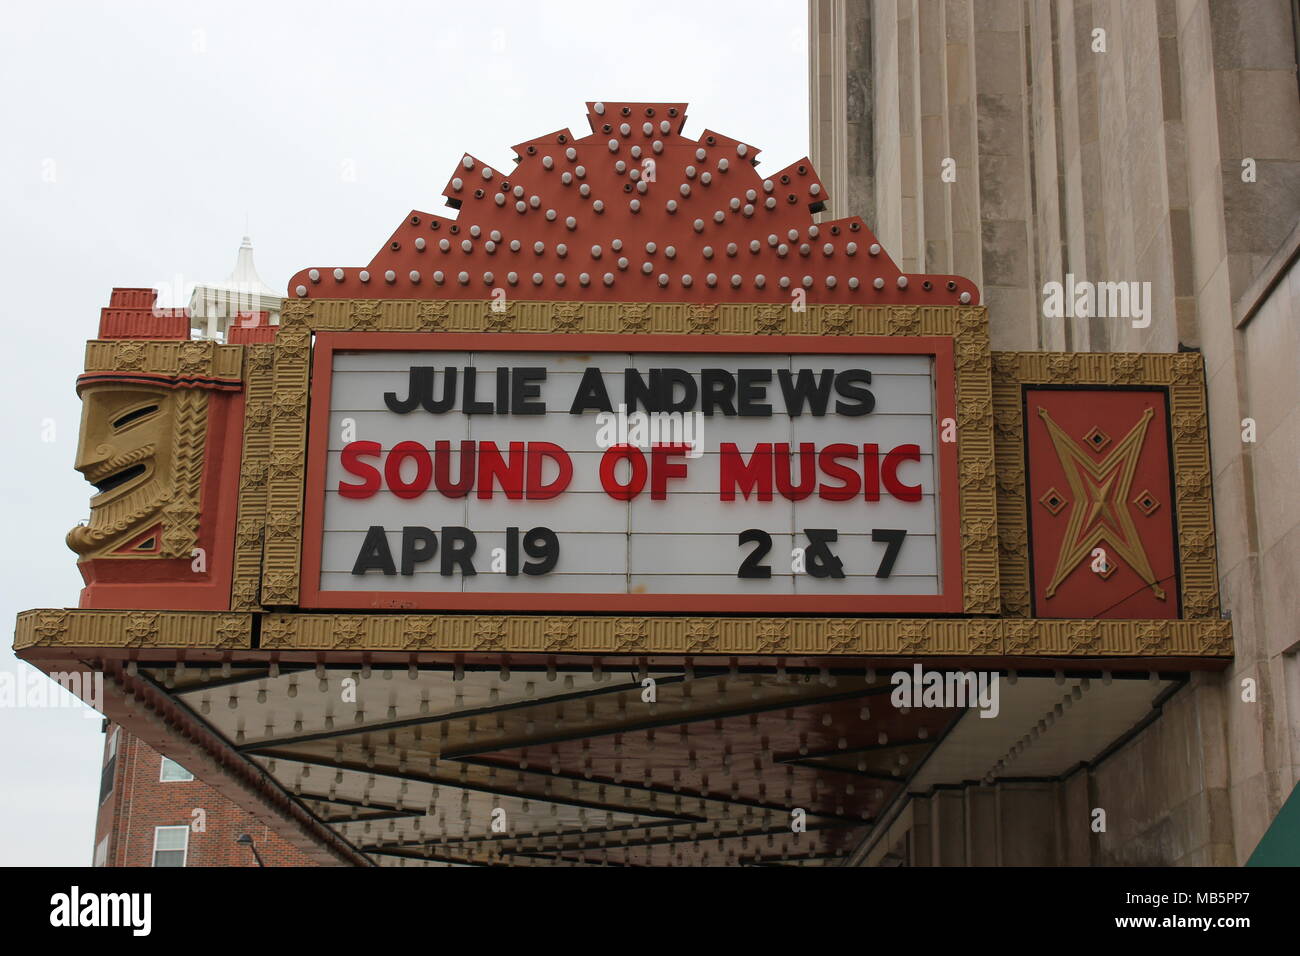 The movie Sound of Music with Julie Andrews on a fancy theater marquee. Stock Photo